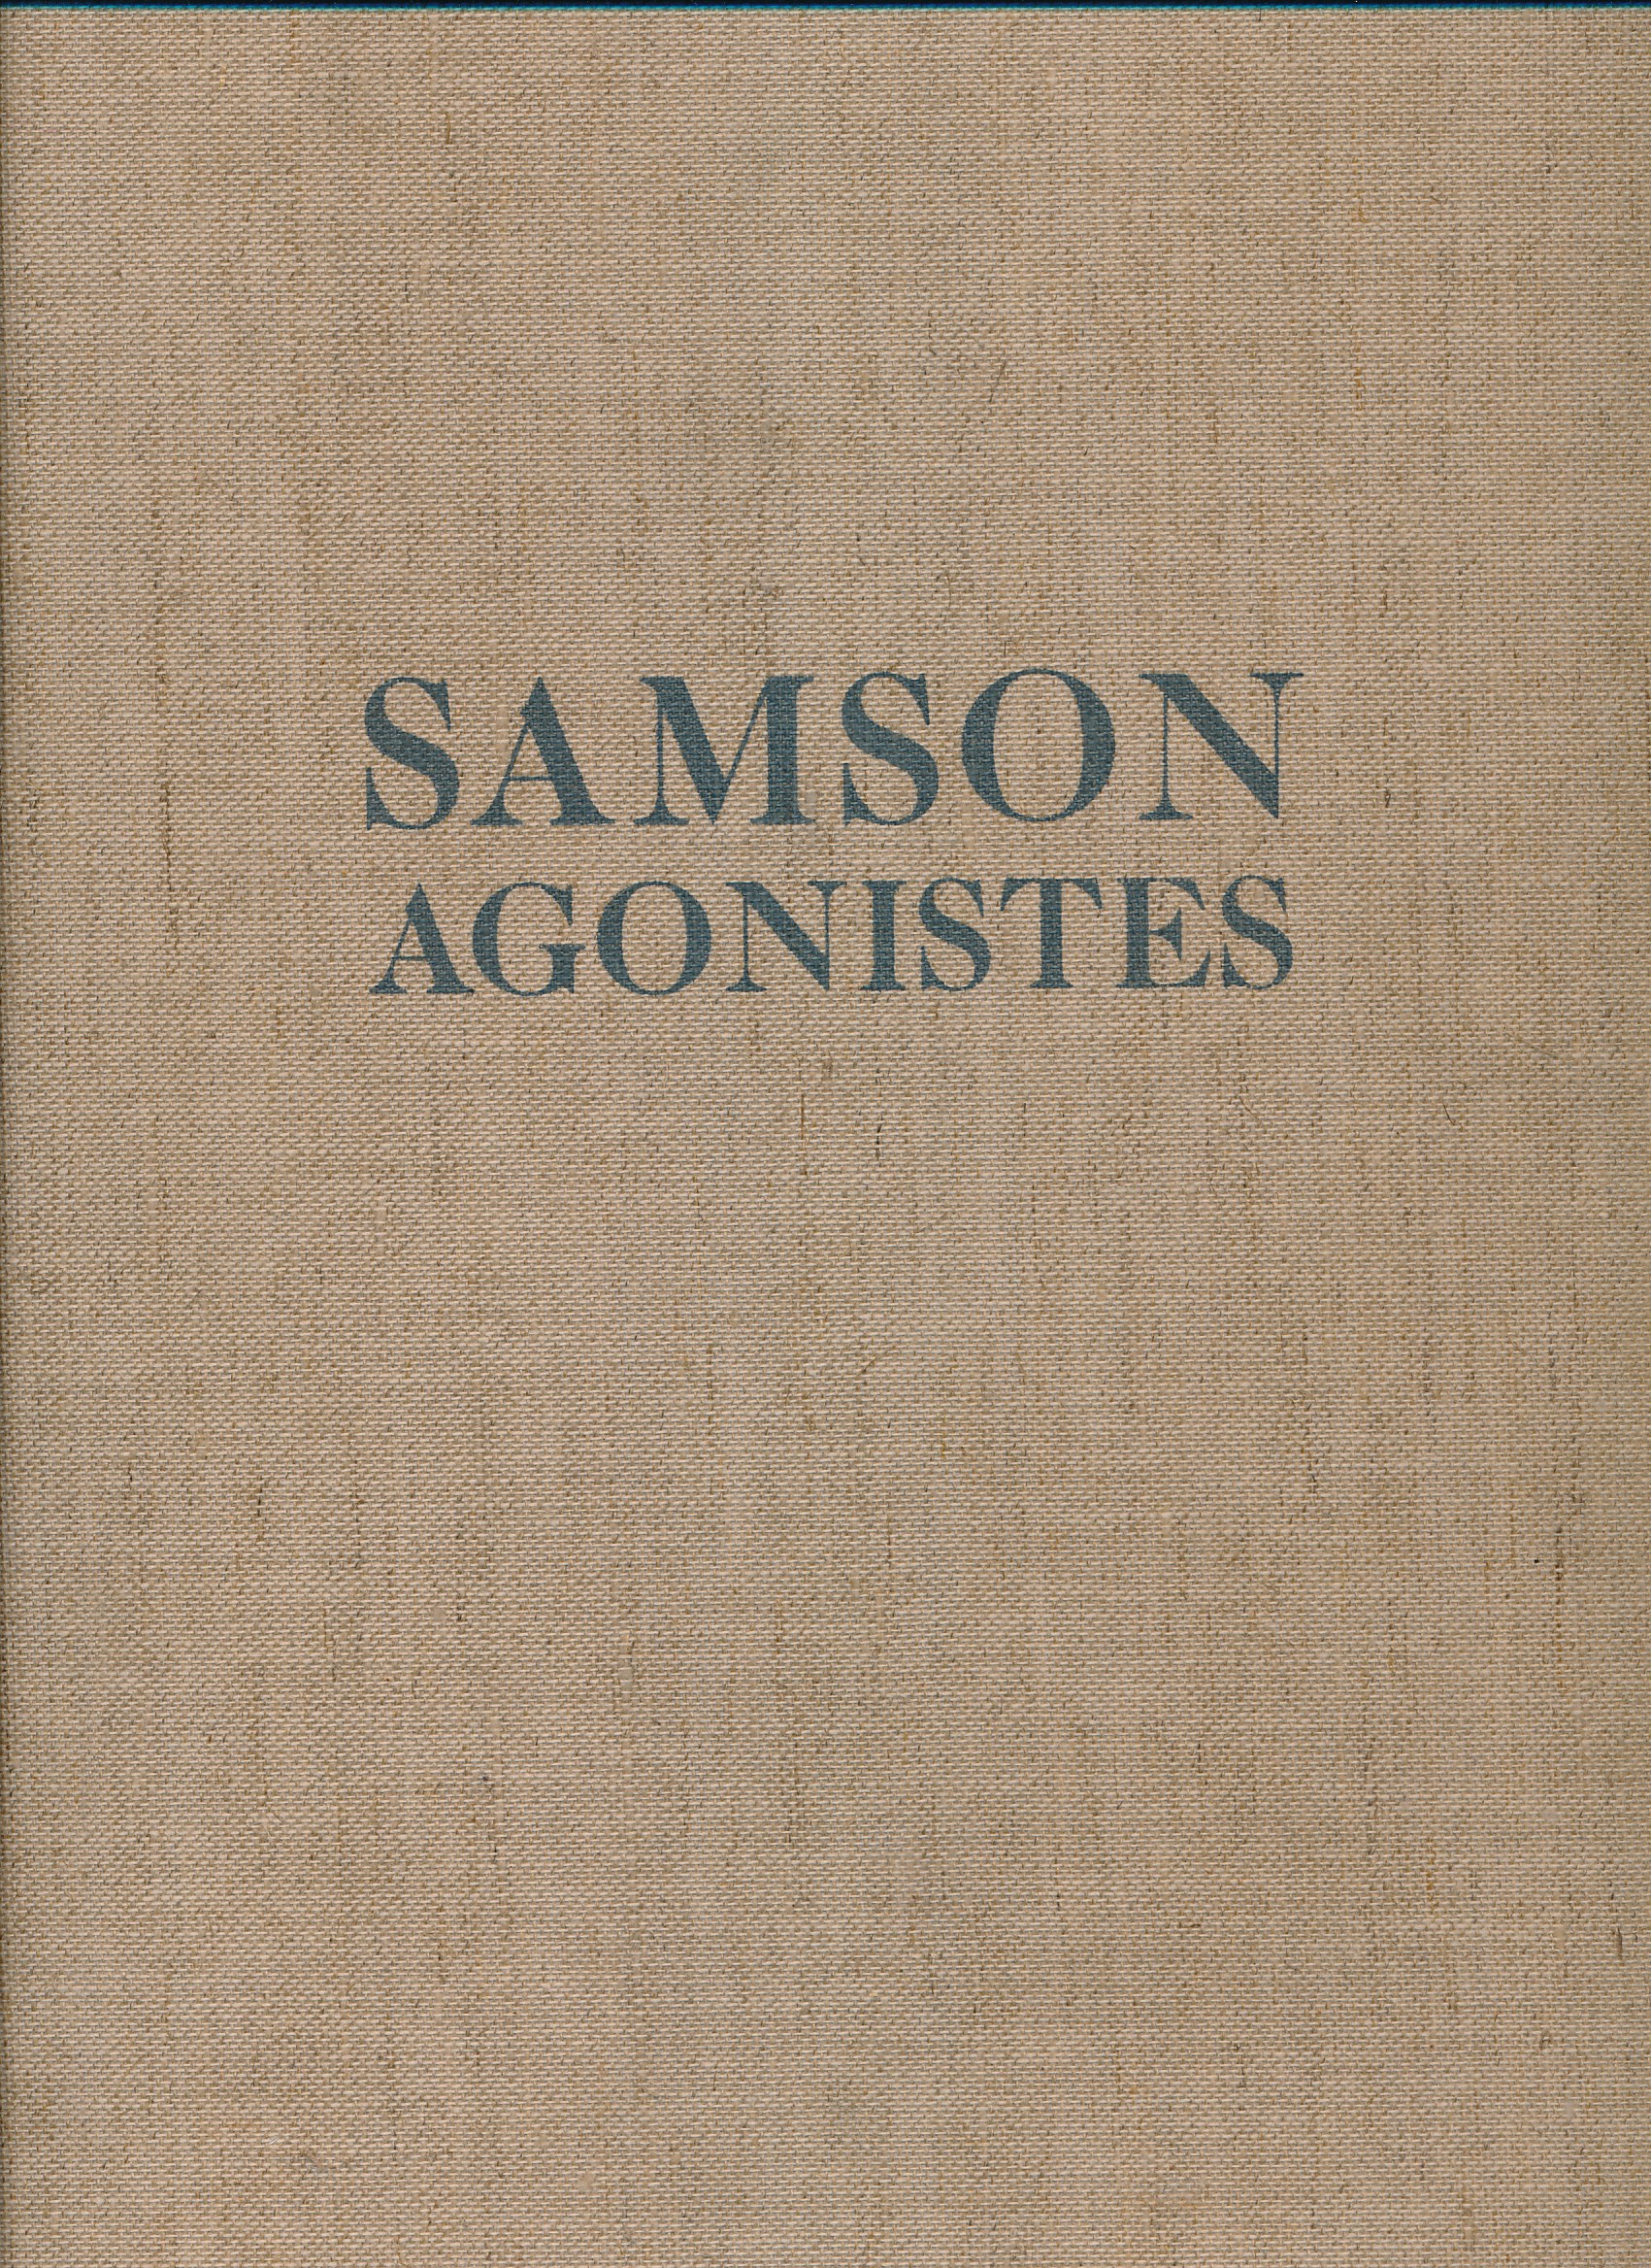 Samson Agonistes. Signed limited edition.